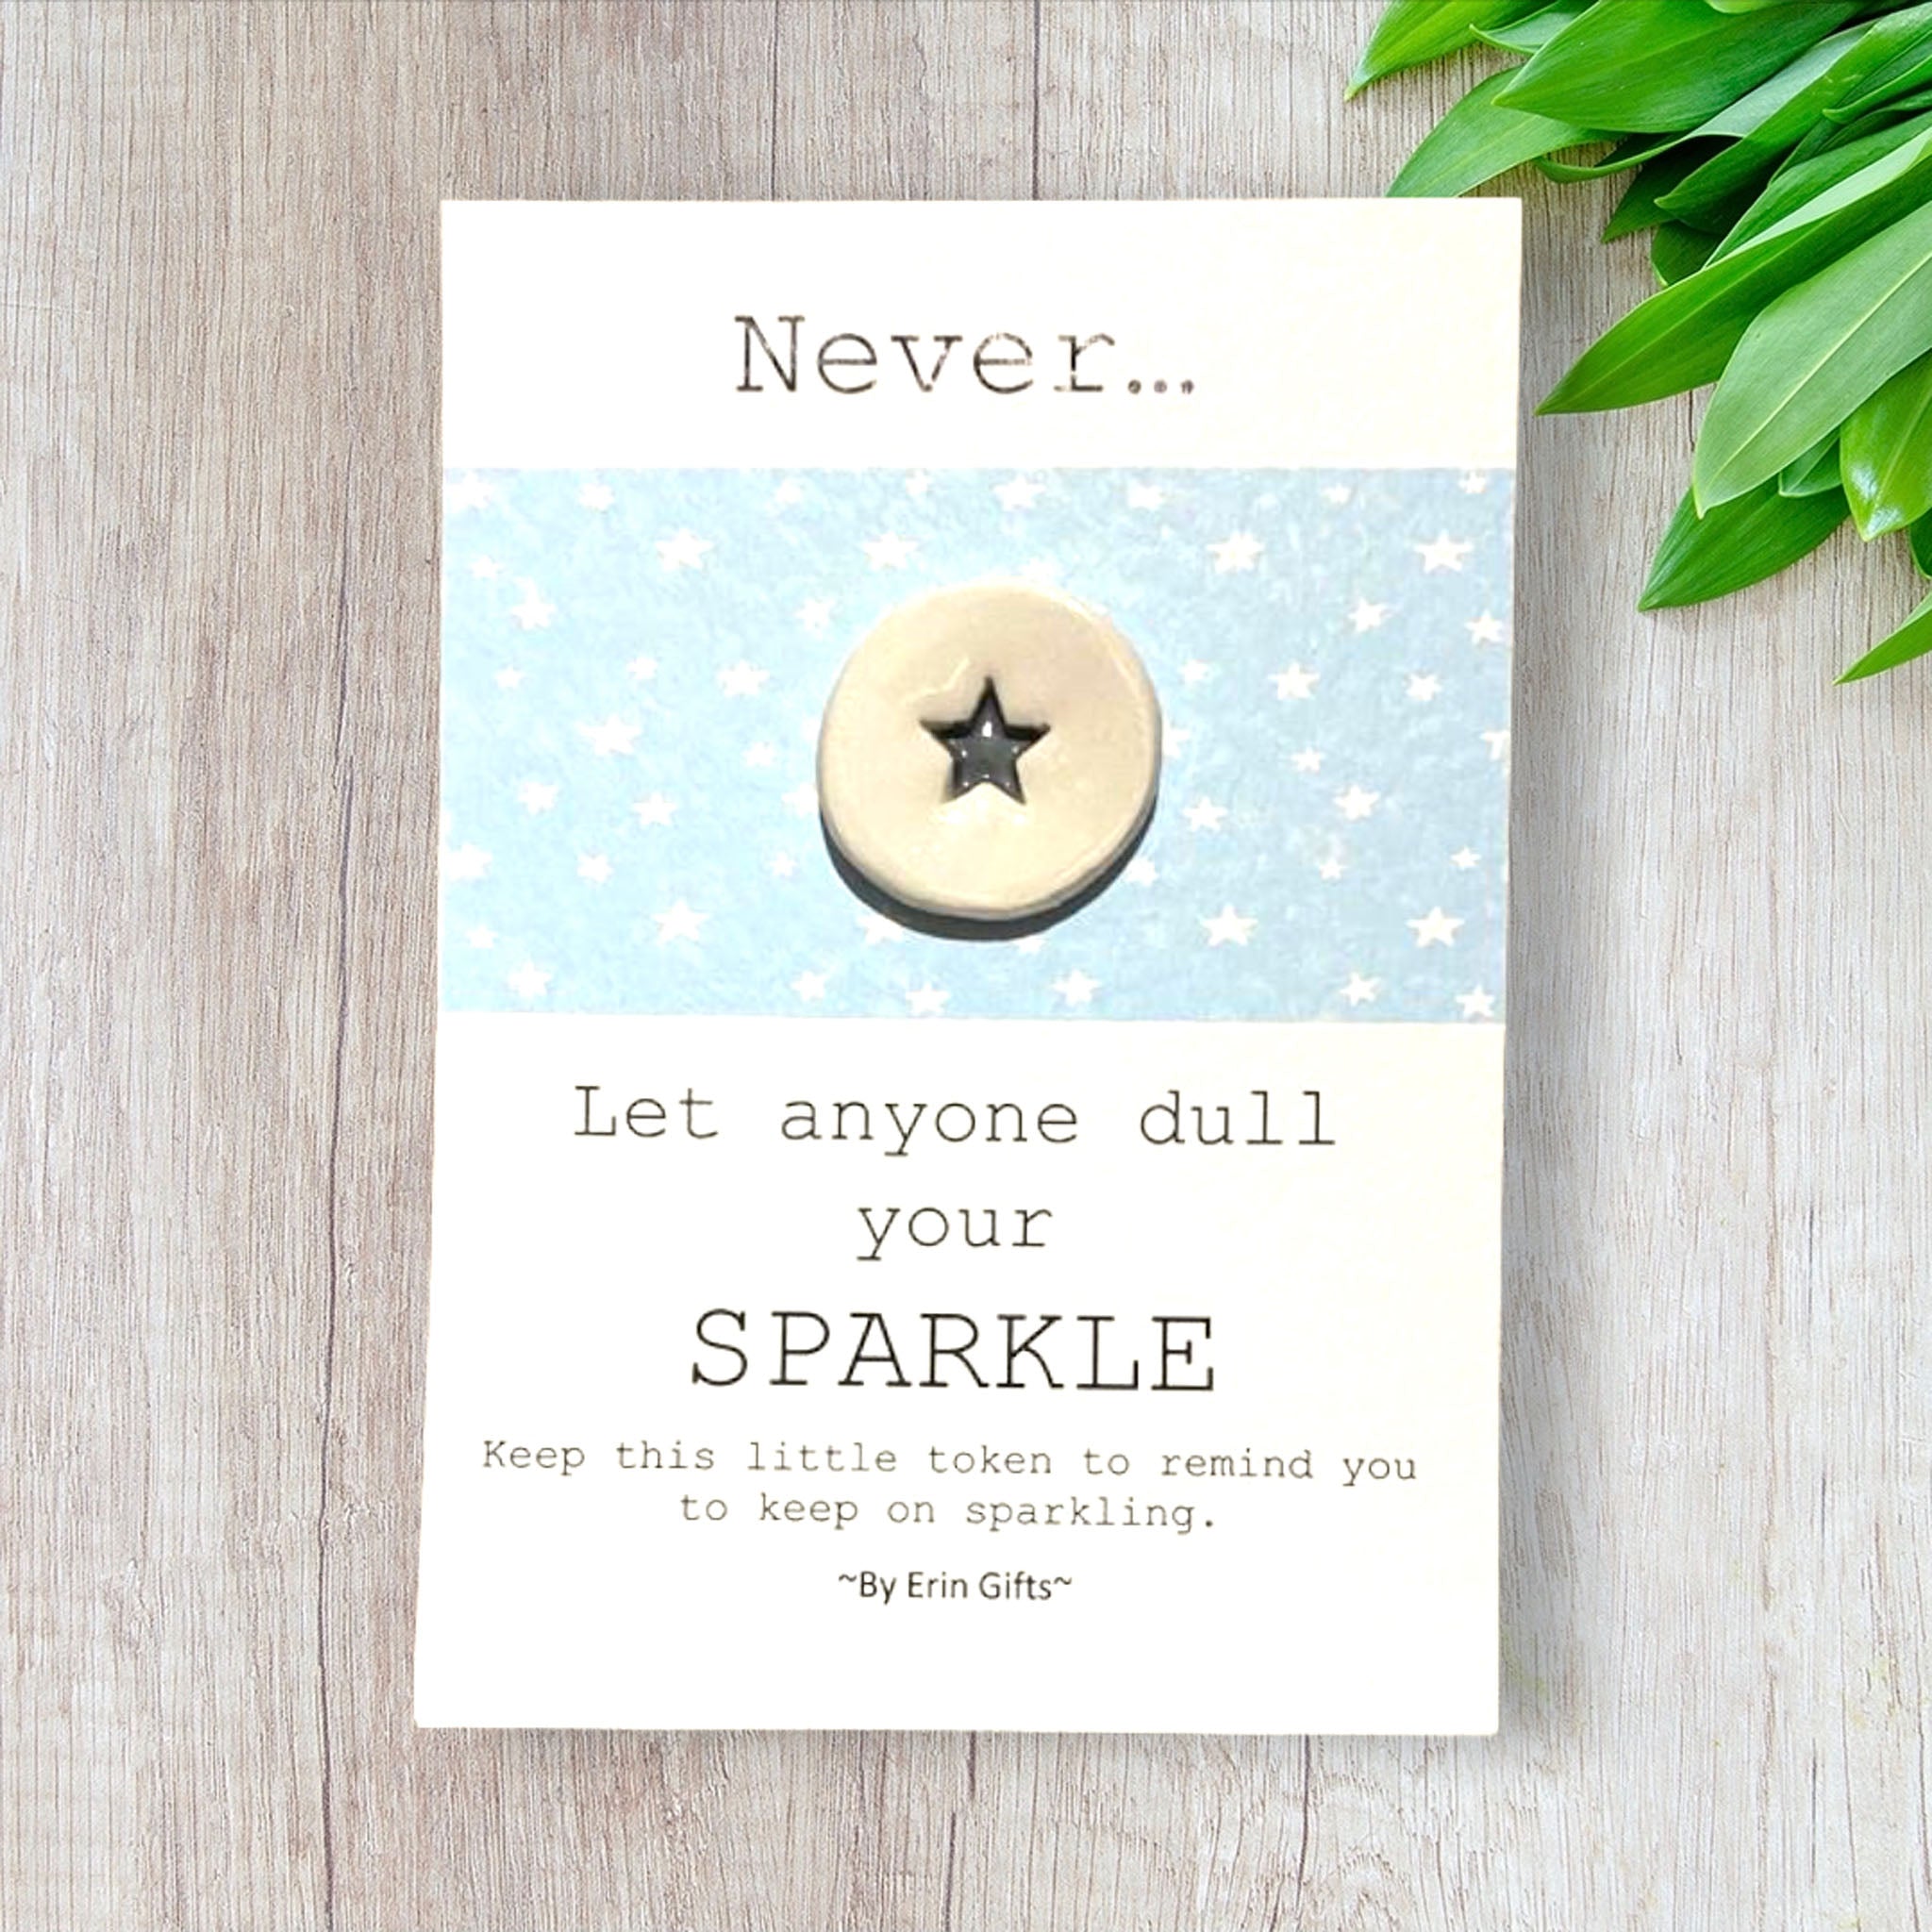 Never let anyone dull your sparkle   Ceramic Wish Token and Card